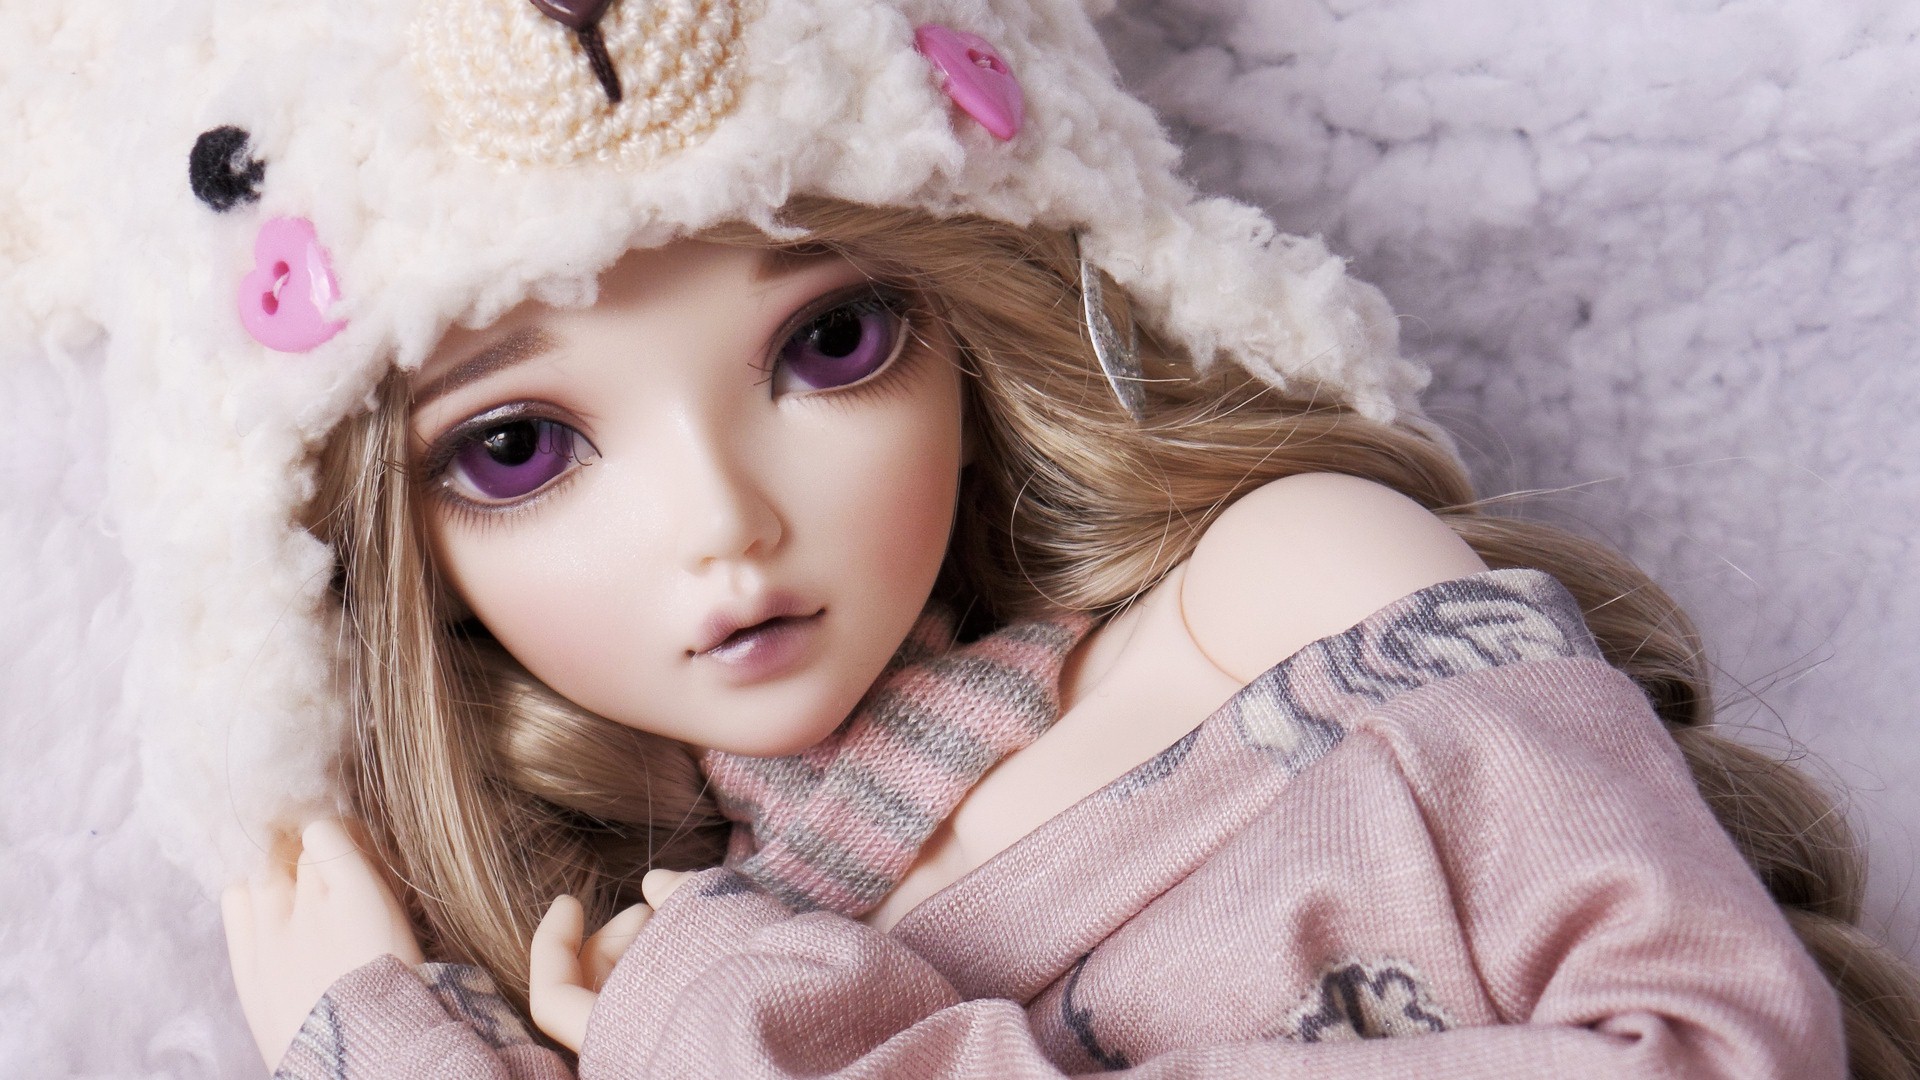 Doll Background Wallpapers Pack Download 4 Free Ver - Cute Dolls Pics Hd -  1920x1080 Wallpaper 